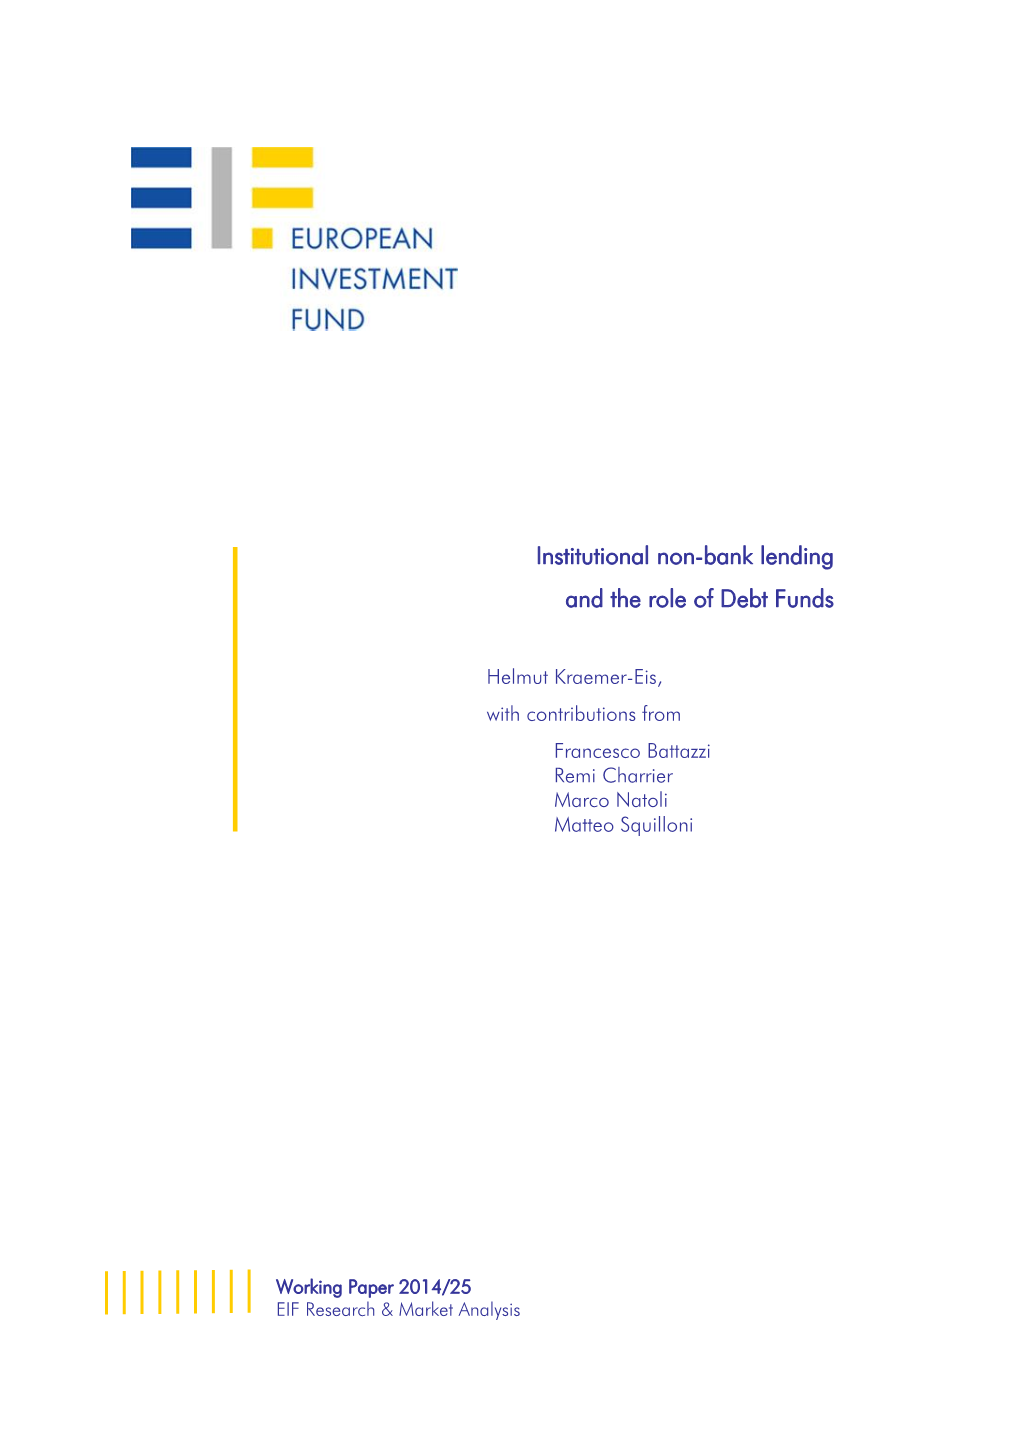 Institutional Non-Bank Lending and the Role of Debt Funds